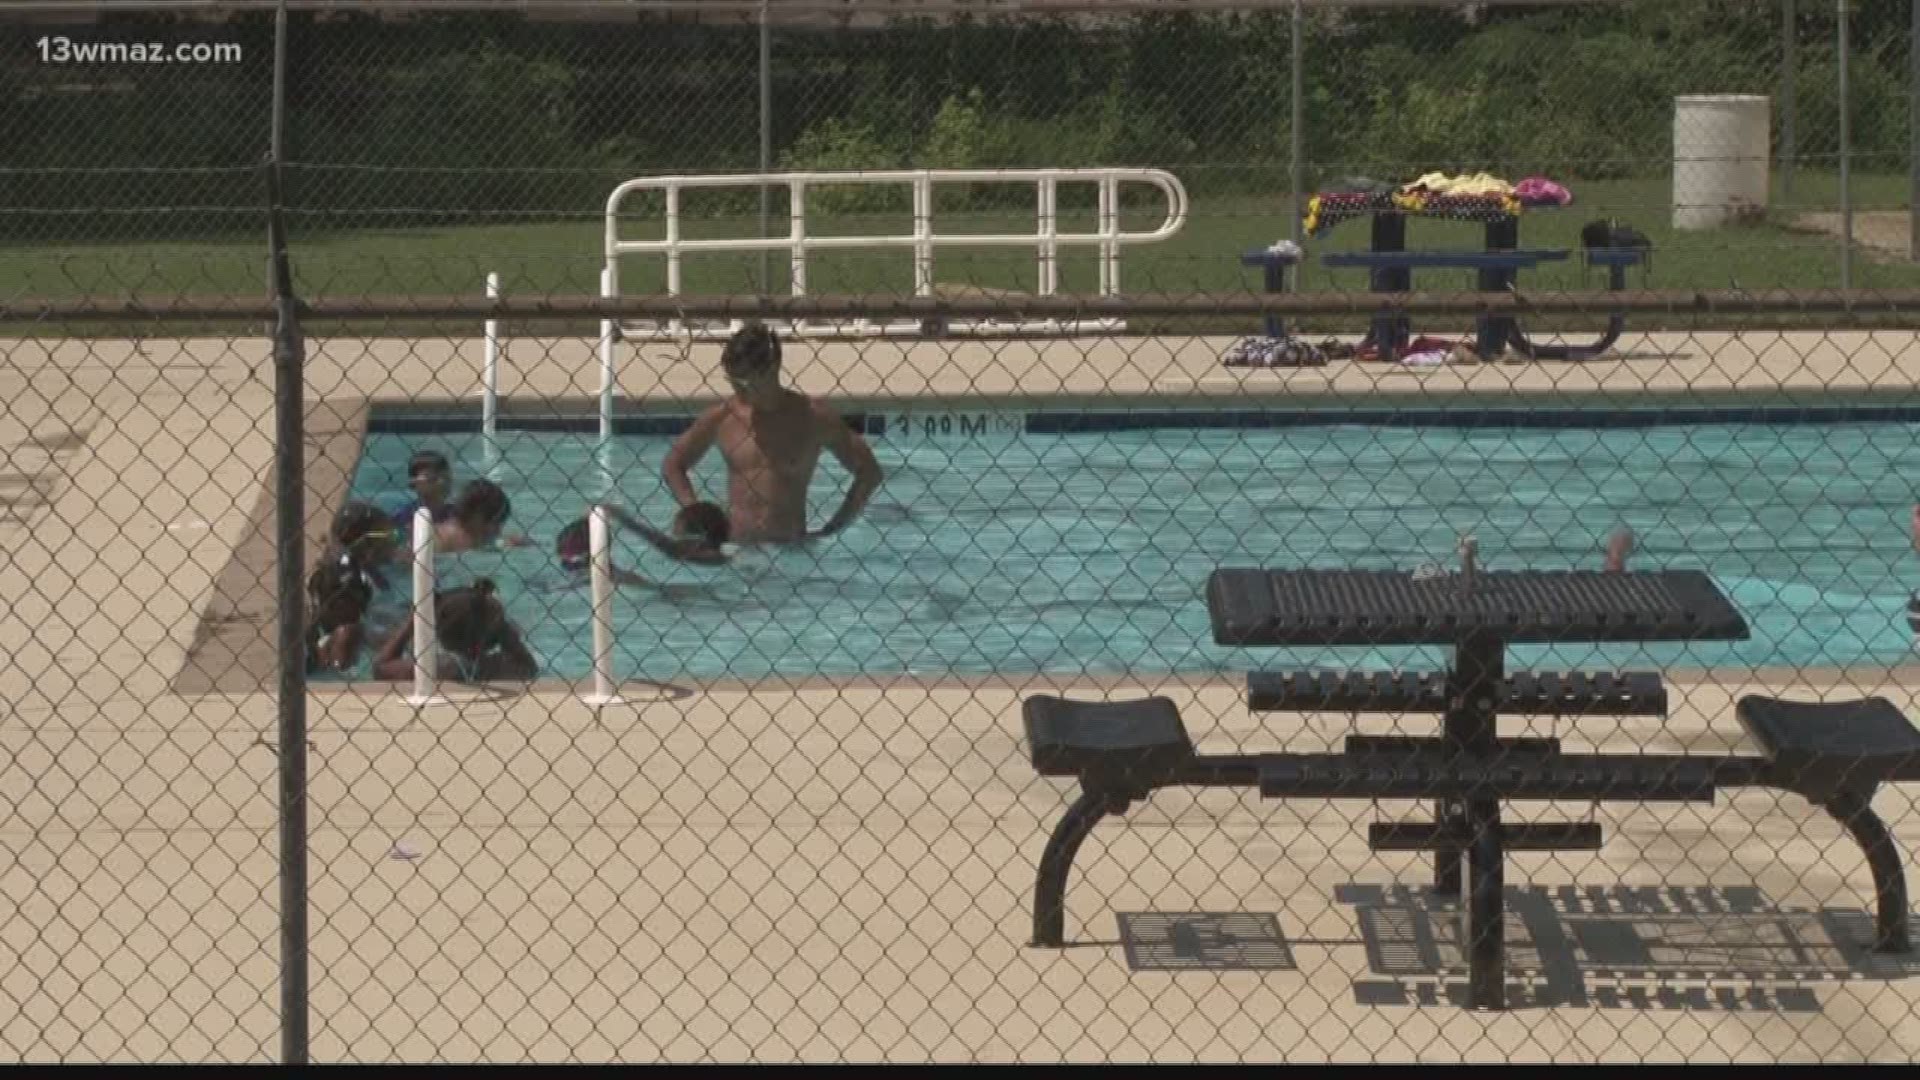 VERIFY: Can you swim after eating?